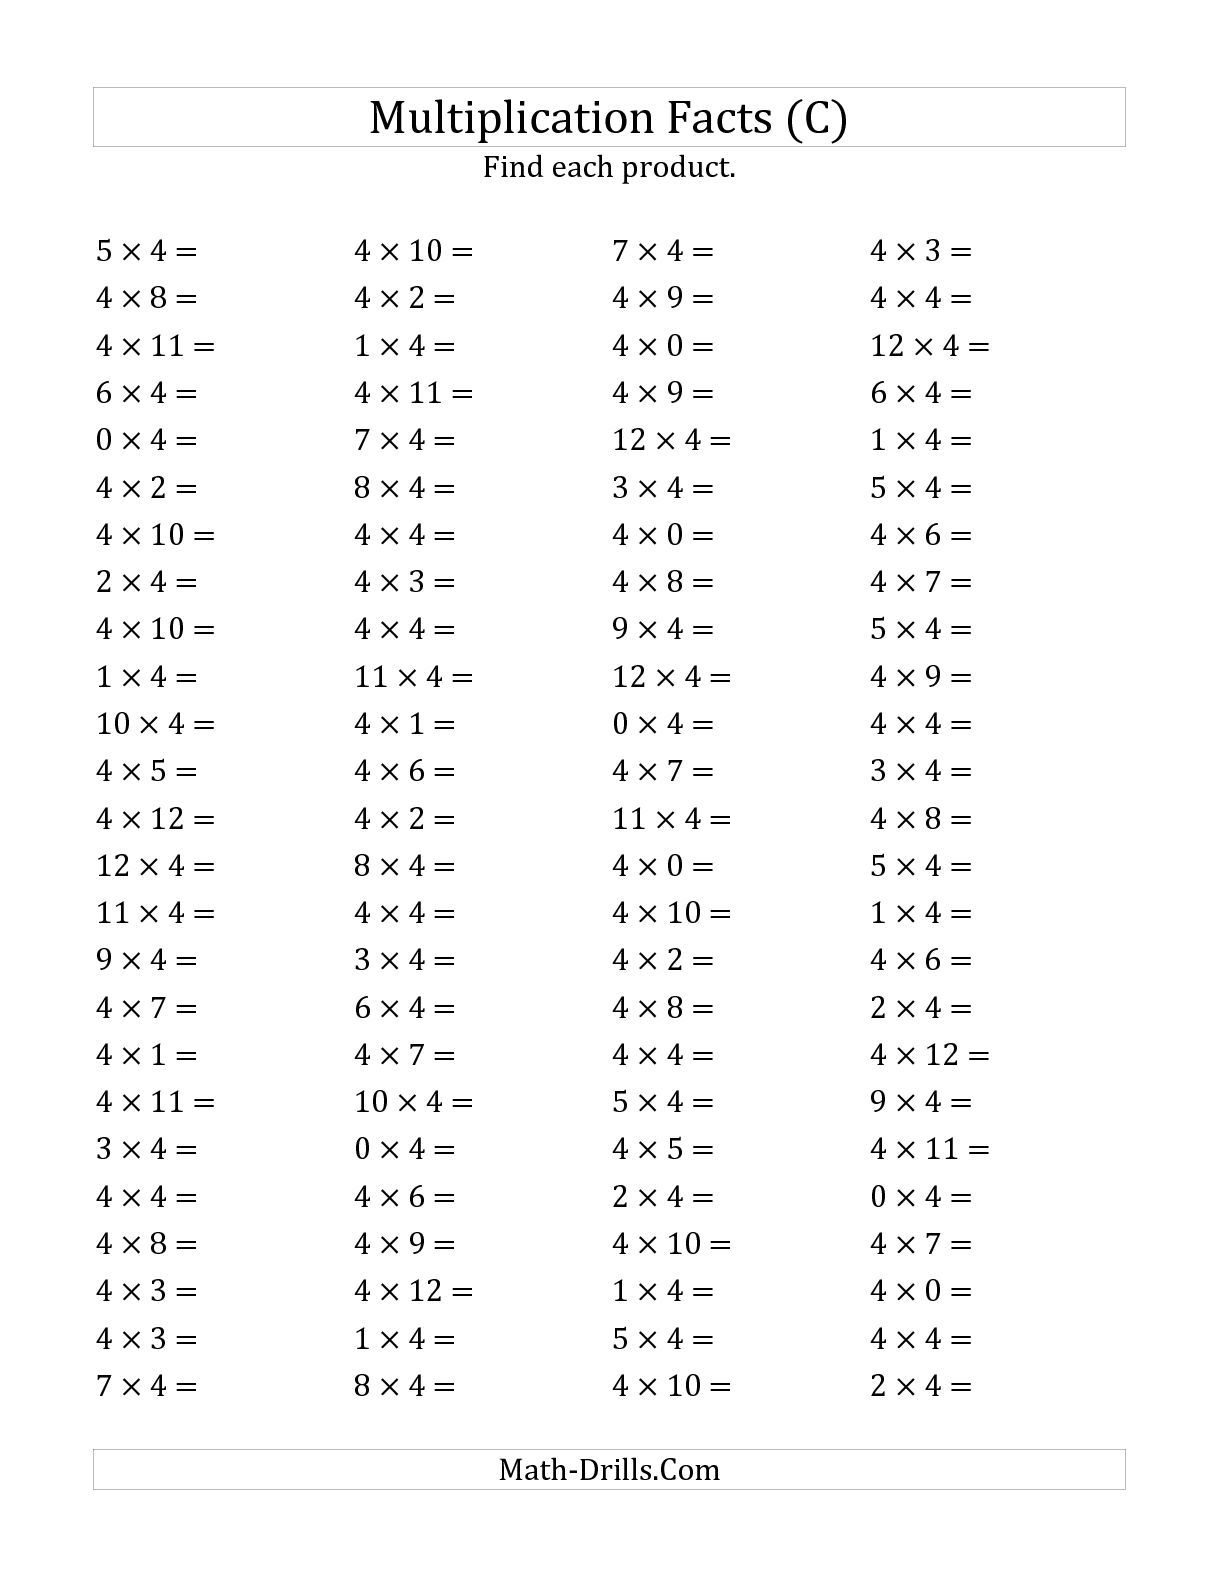 other-printable-images-gallery-category-page-276-multiplication